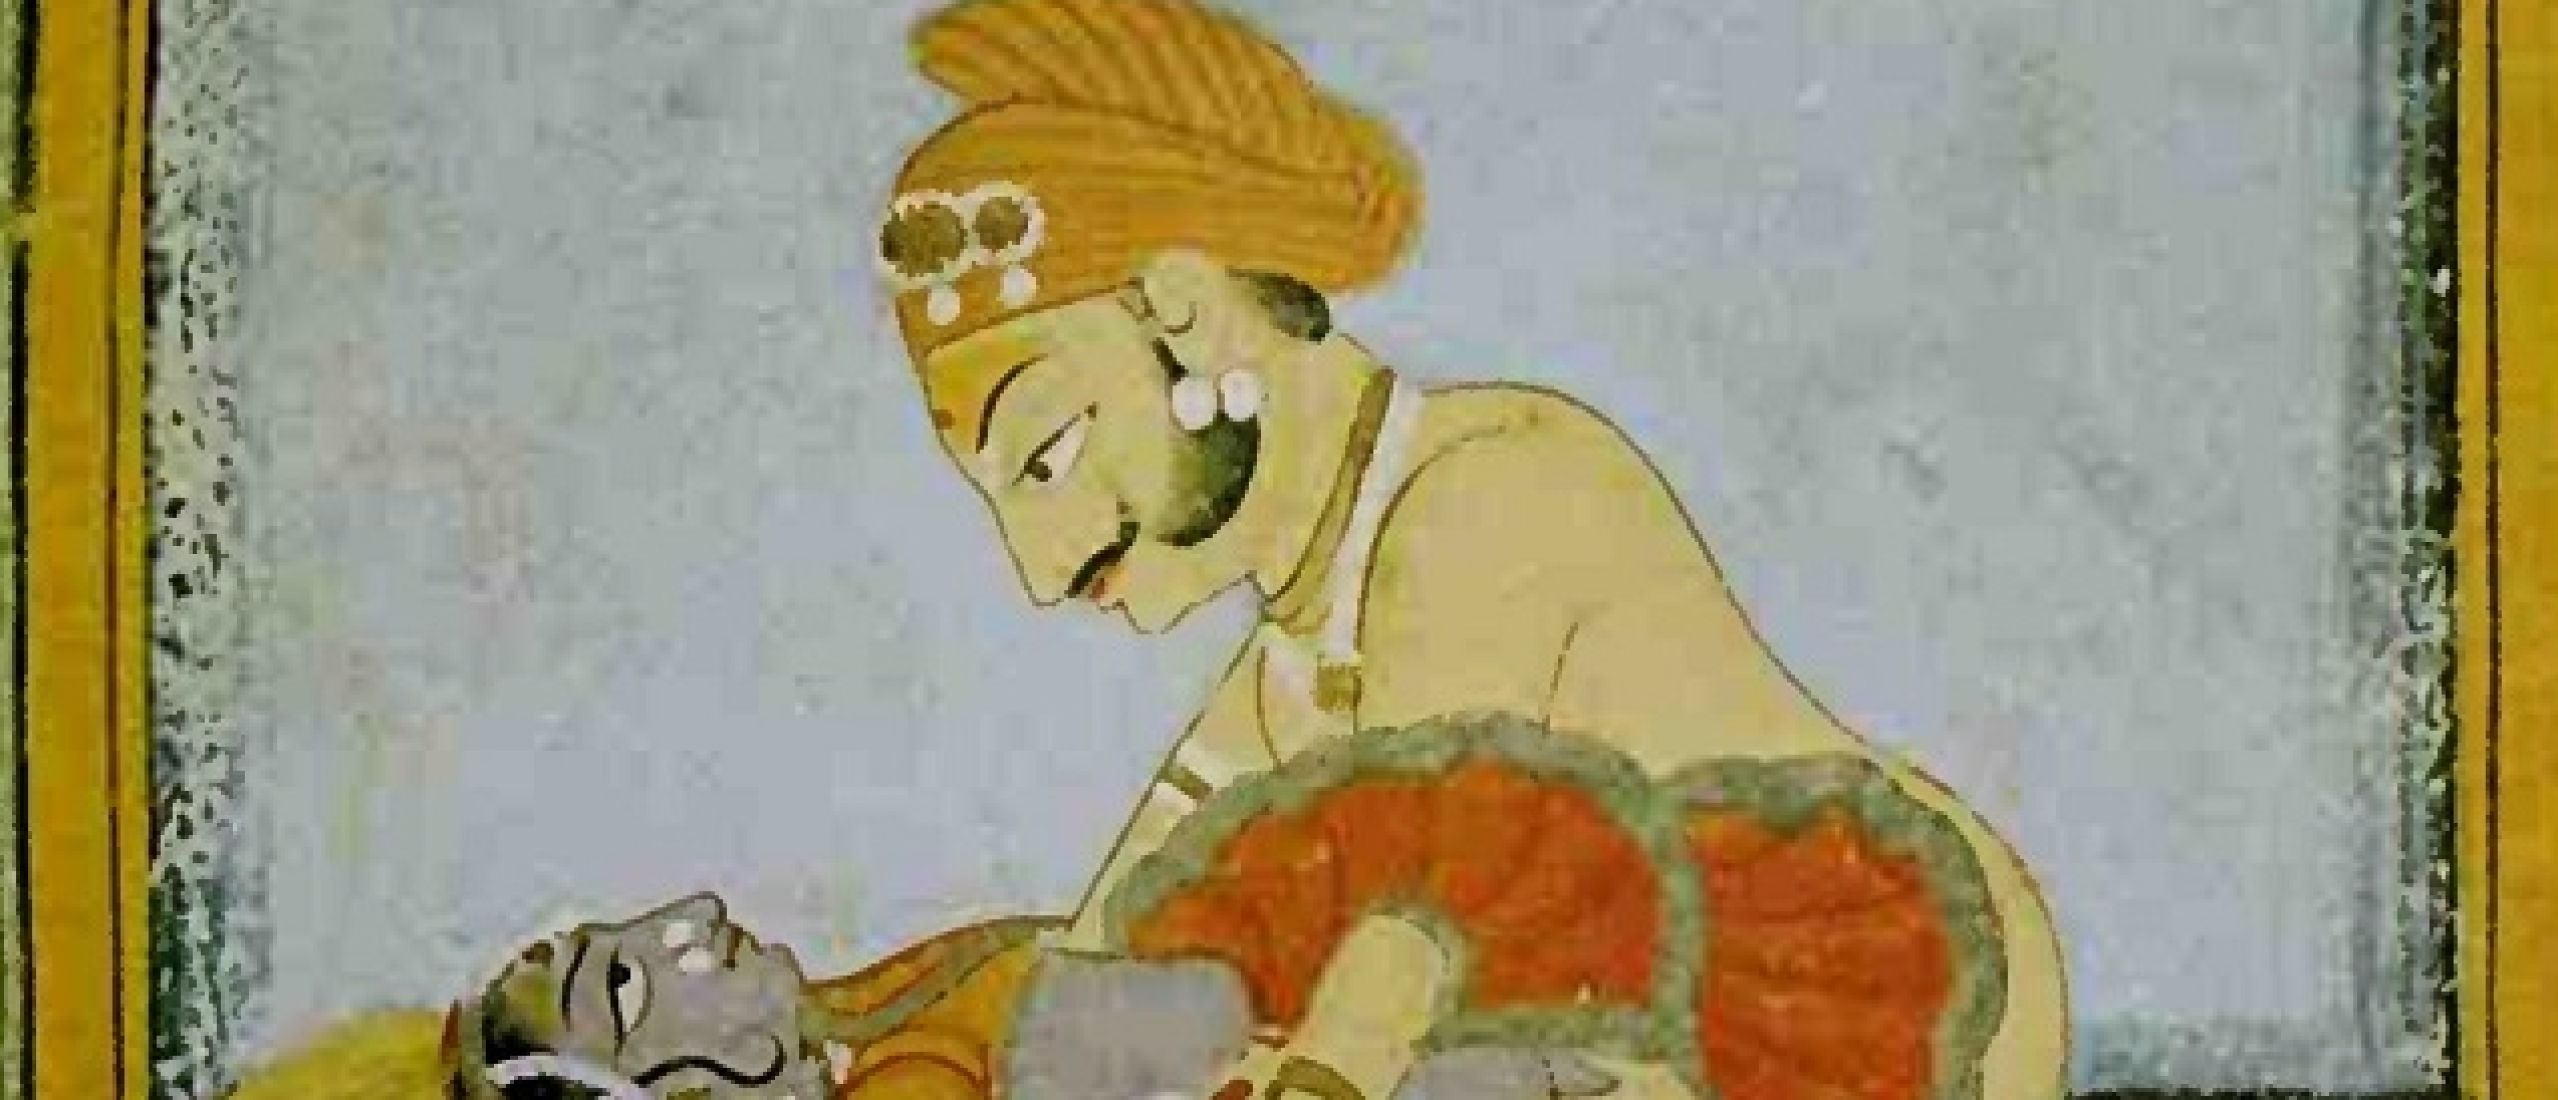 erotic Mighyl style painting late 18th century